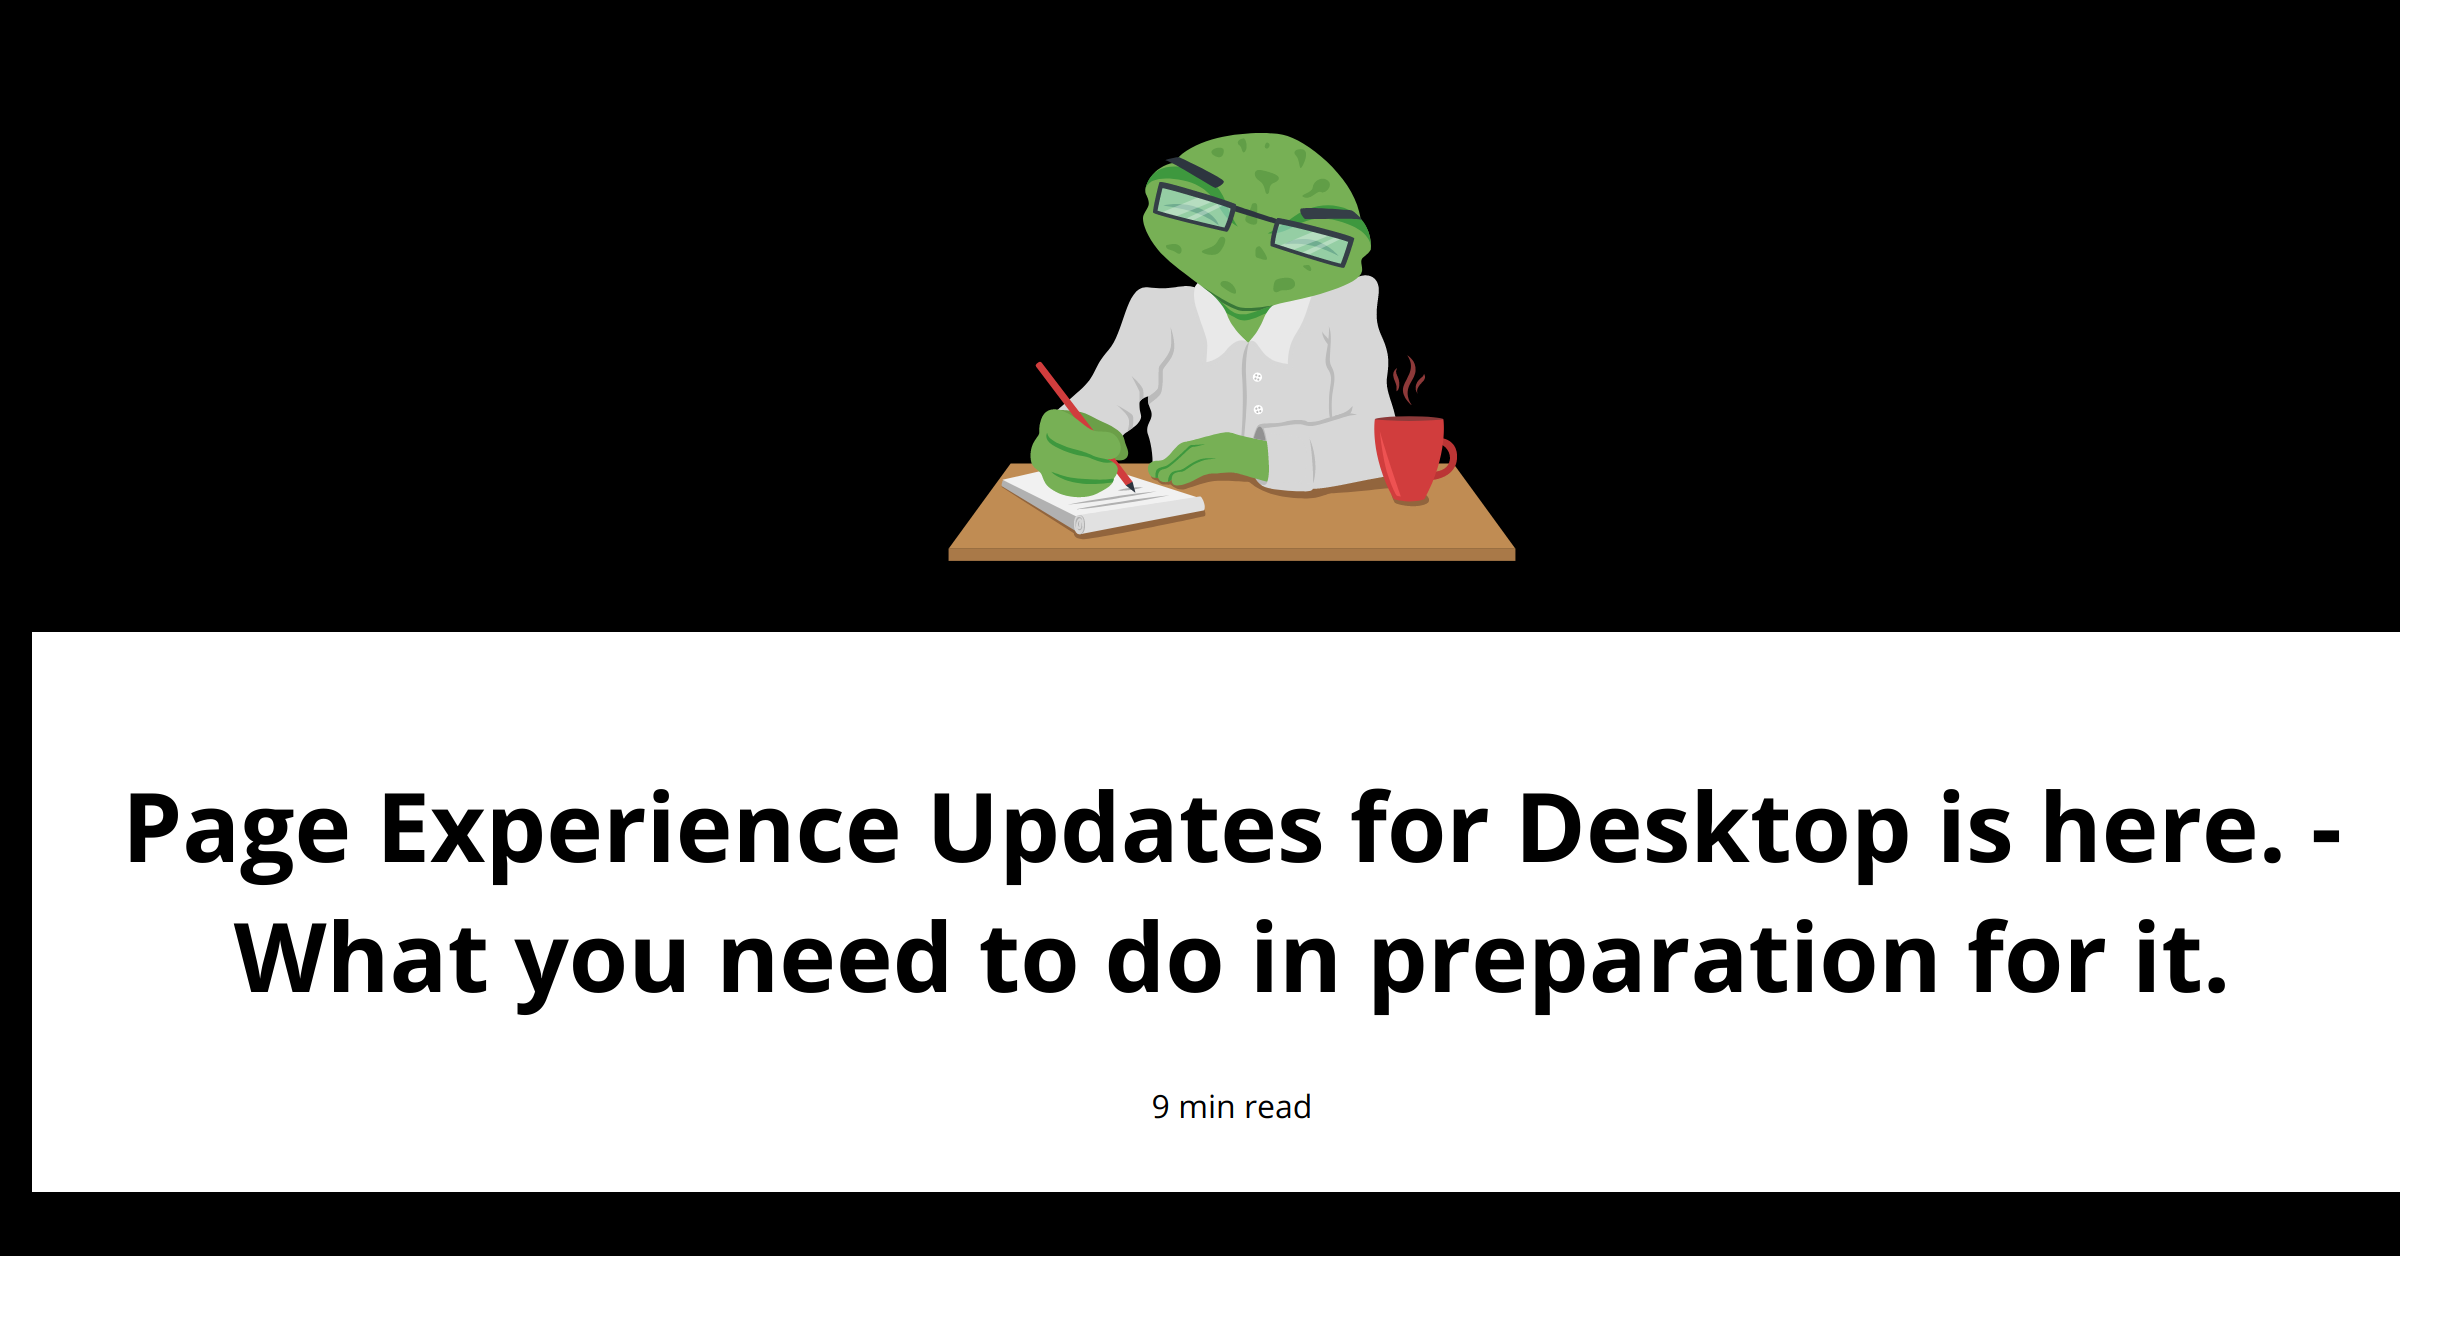 Page Experience Updates for Desktop is here. - What you need to do in preparation for it.